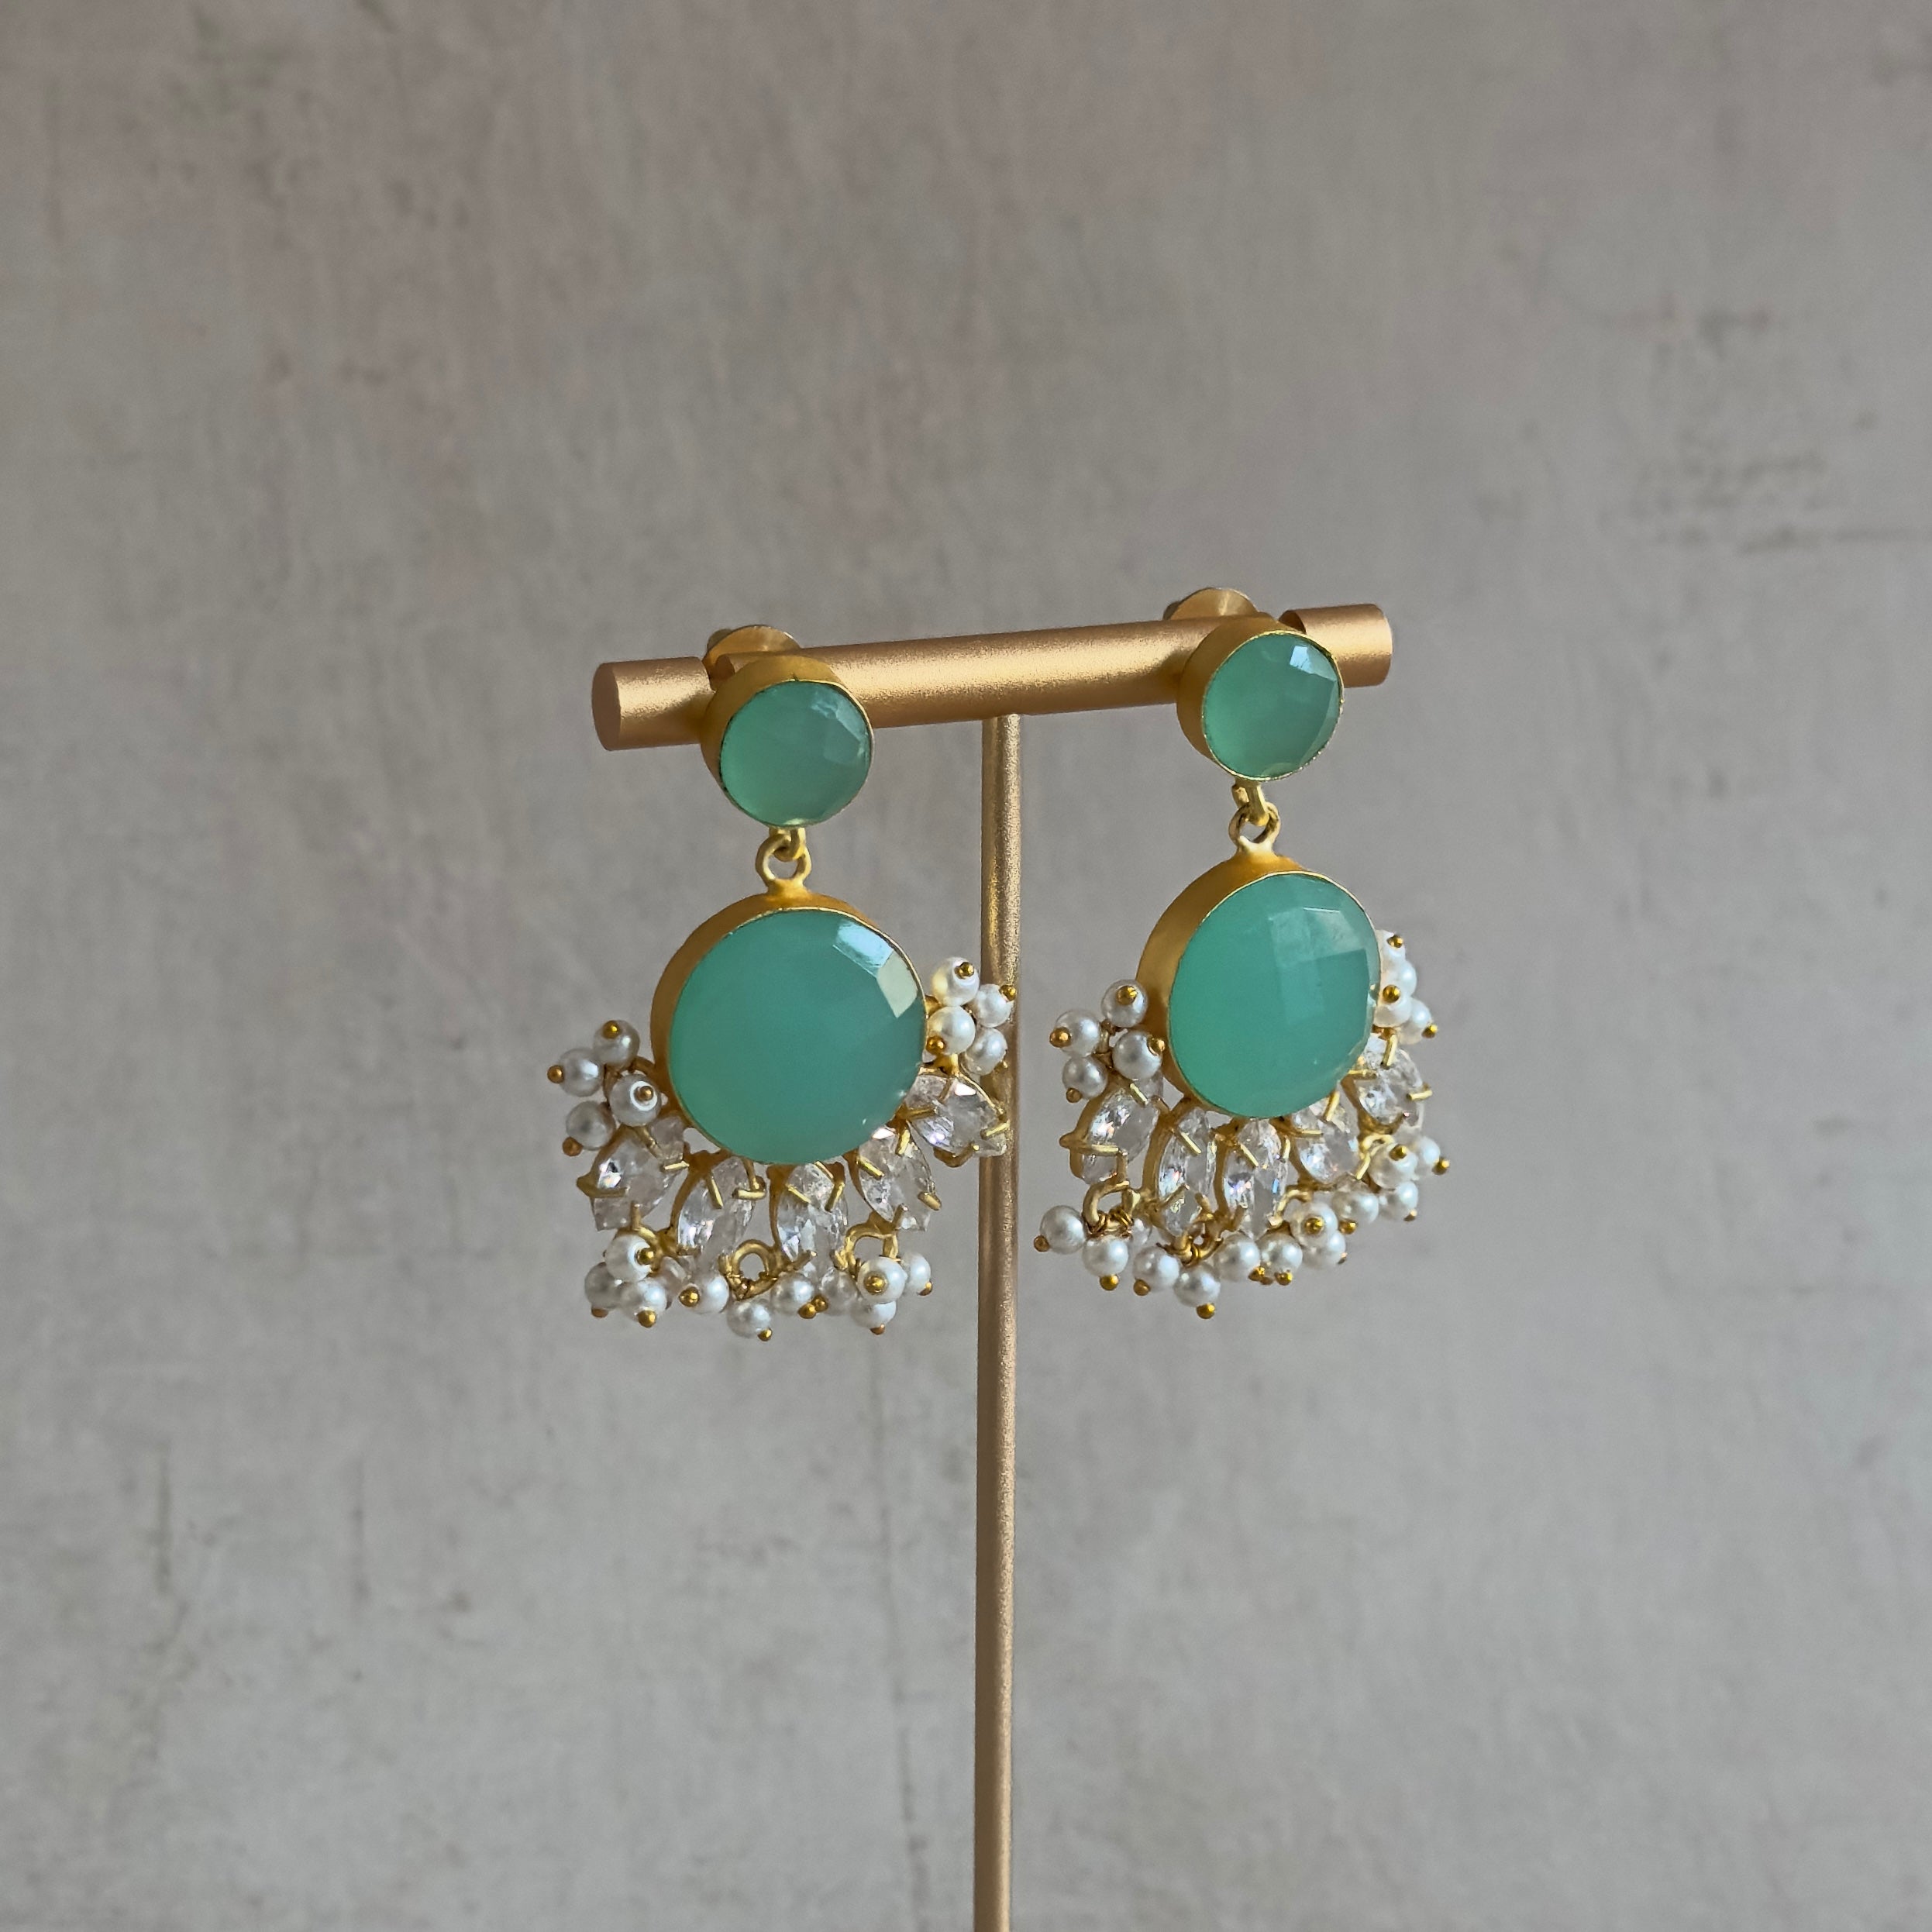 Indulge in elegance with our Marina Crystal Drop Earrings. The vibrant aquamarine and stunning CZ crystals will add a touch of glamour to any outfit. Elevate your style and make a statement with these mesmerizing earrings!